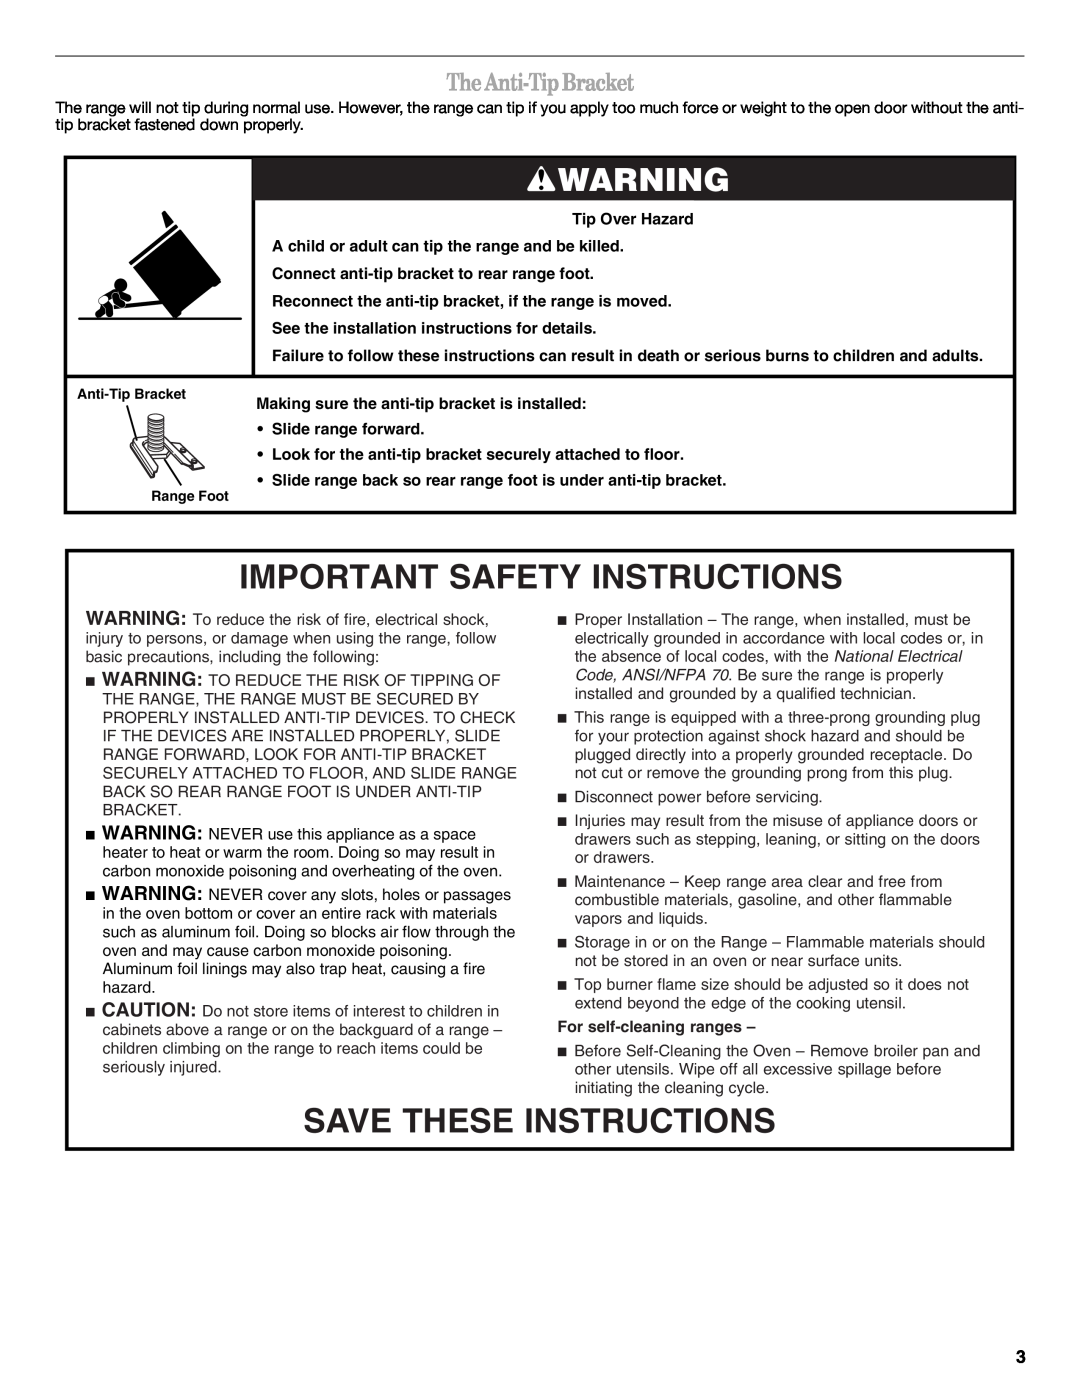 Whirlpool gas range TheAnti-TipBracket, Important Safety Instructions, Save These Instructions, For self-cleaning ranges 